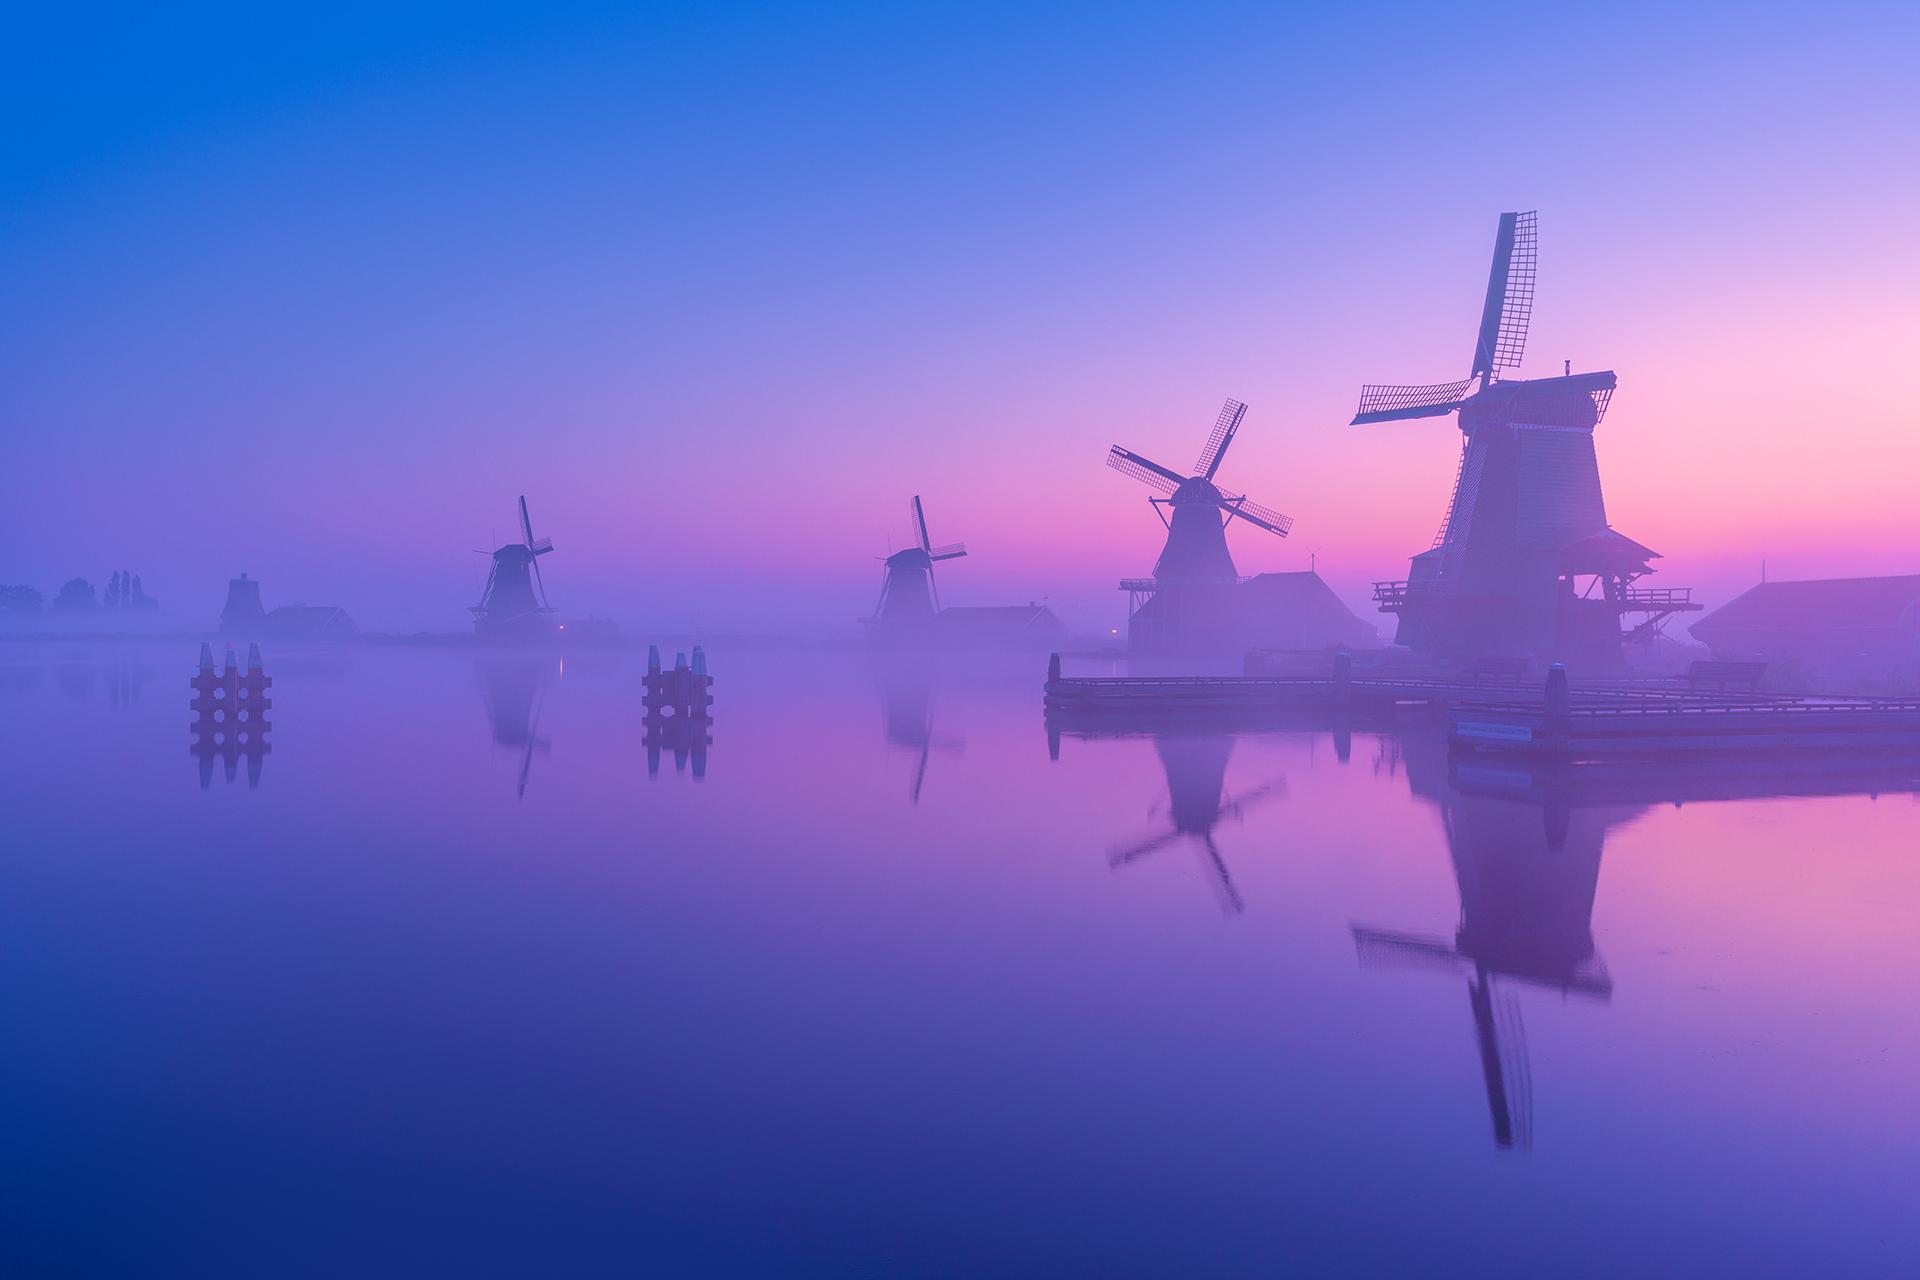 A calm morning in The Netherlands